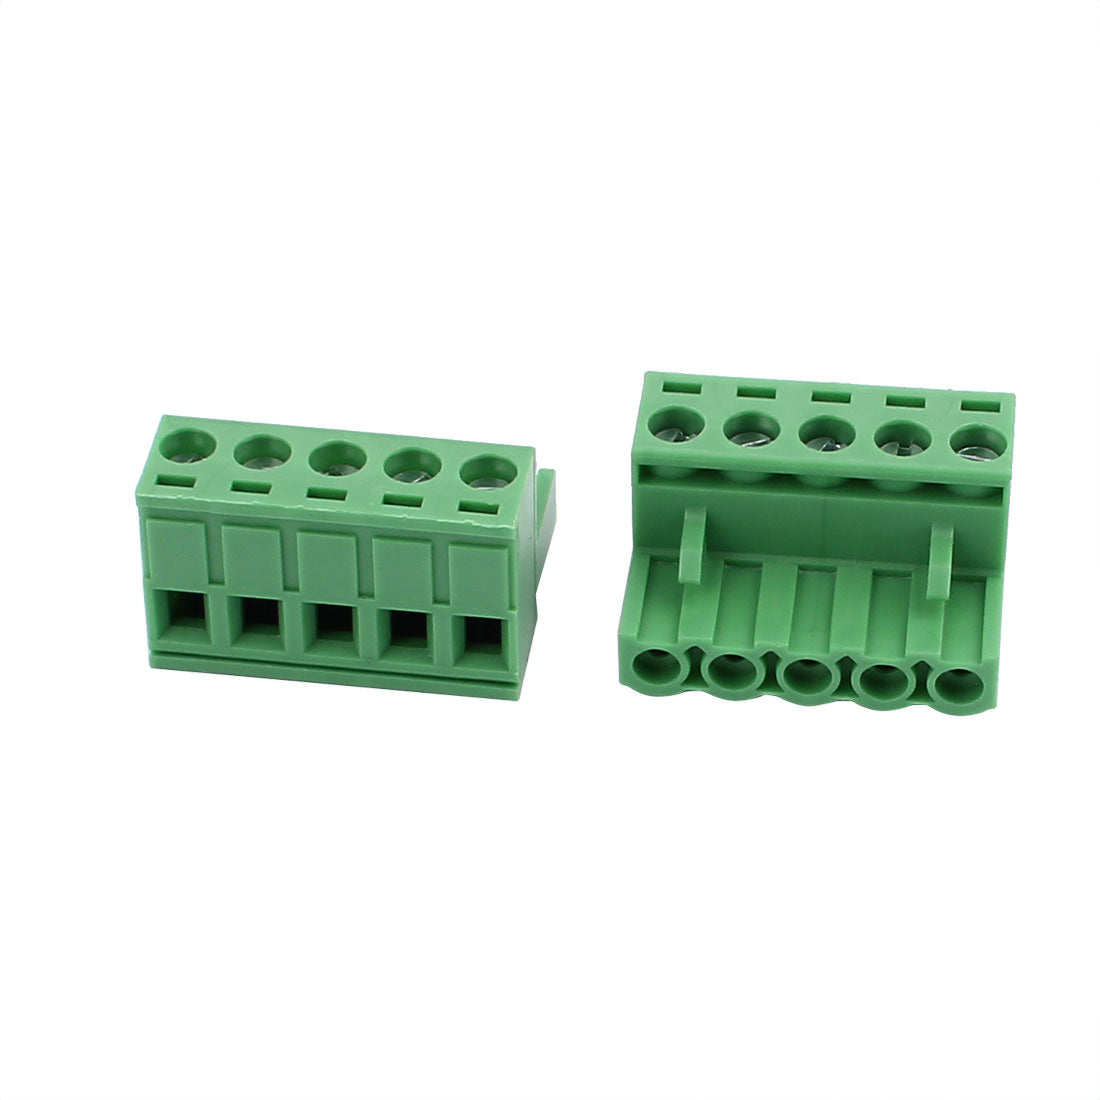 uxcell Uxcell 5Pcs 300V KF2EDGK 5.08mm Pitch 5-Pin PCB Screw Terminal Block Connector